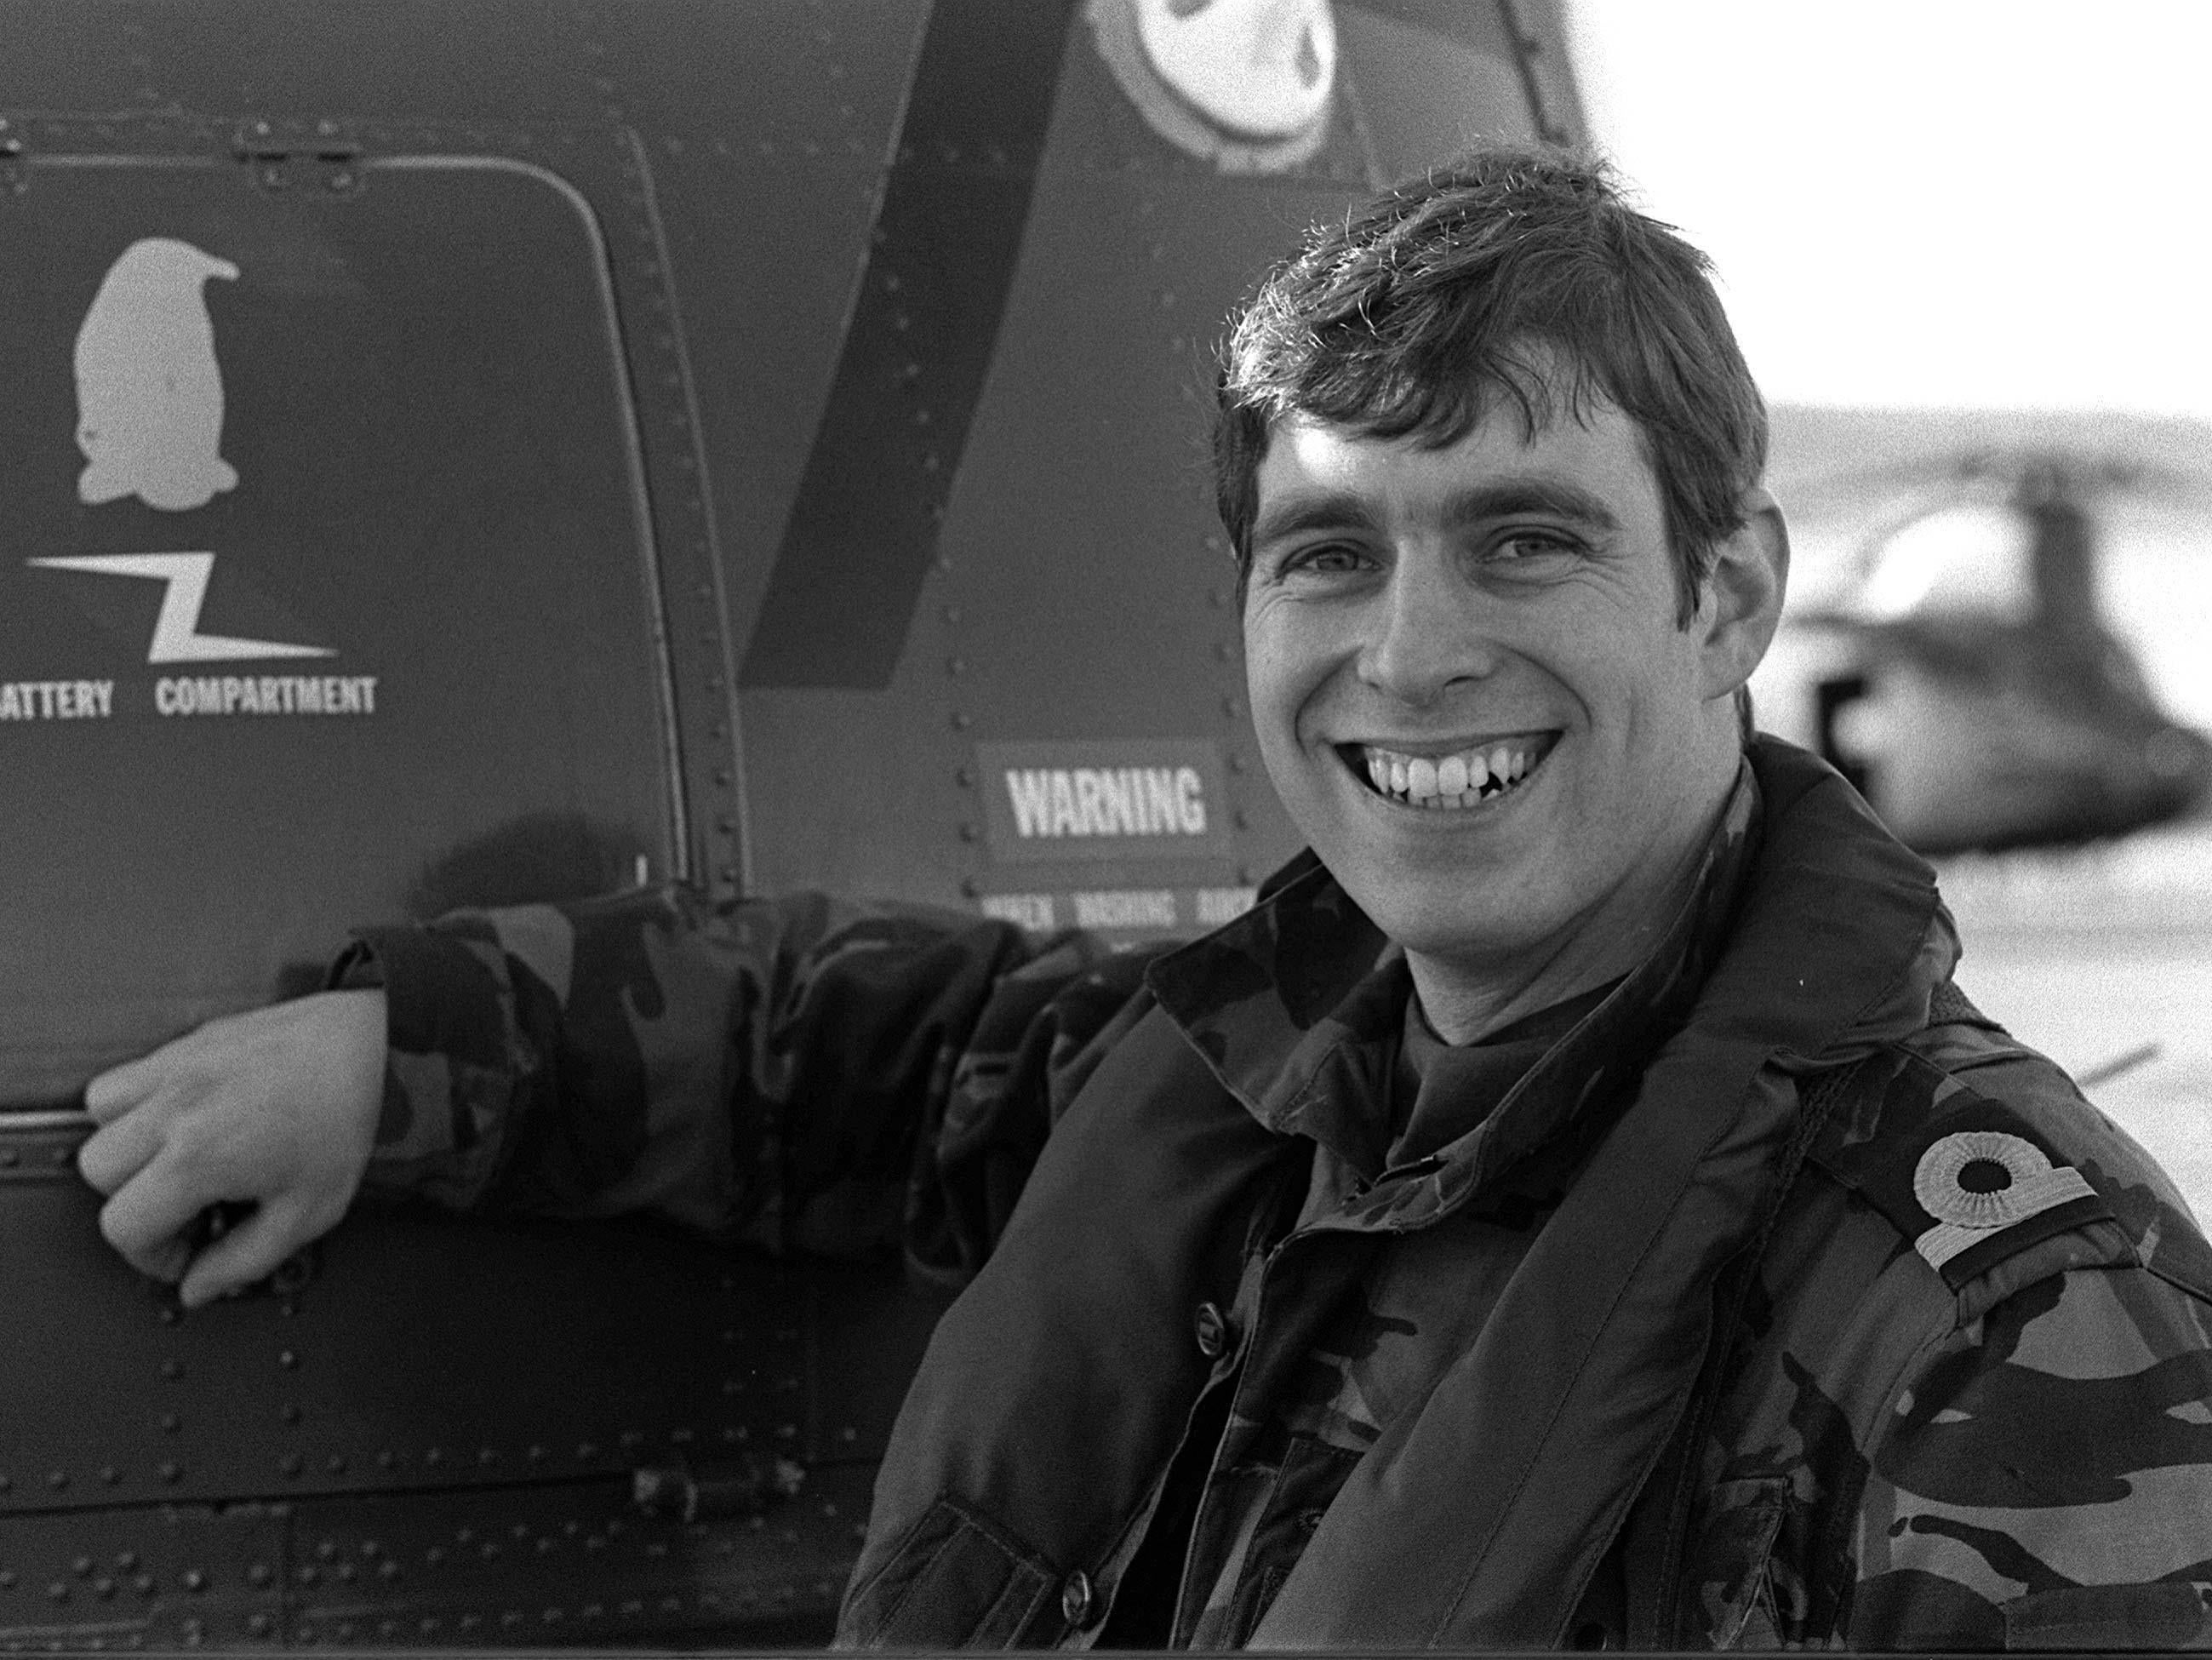 Prince Andrew said he returned from the Falklands War ‘a changed man’ on Instagram before deleting post